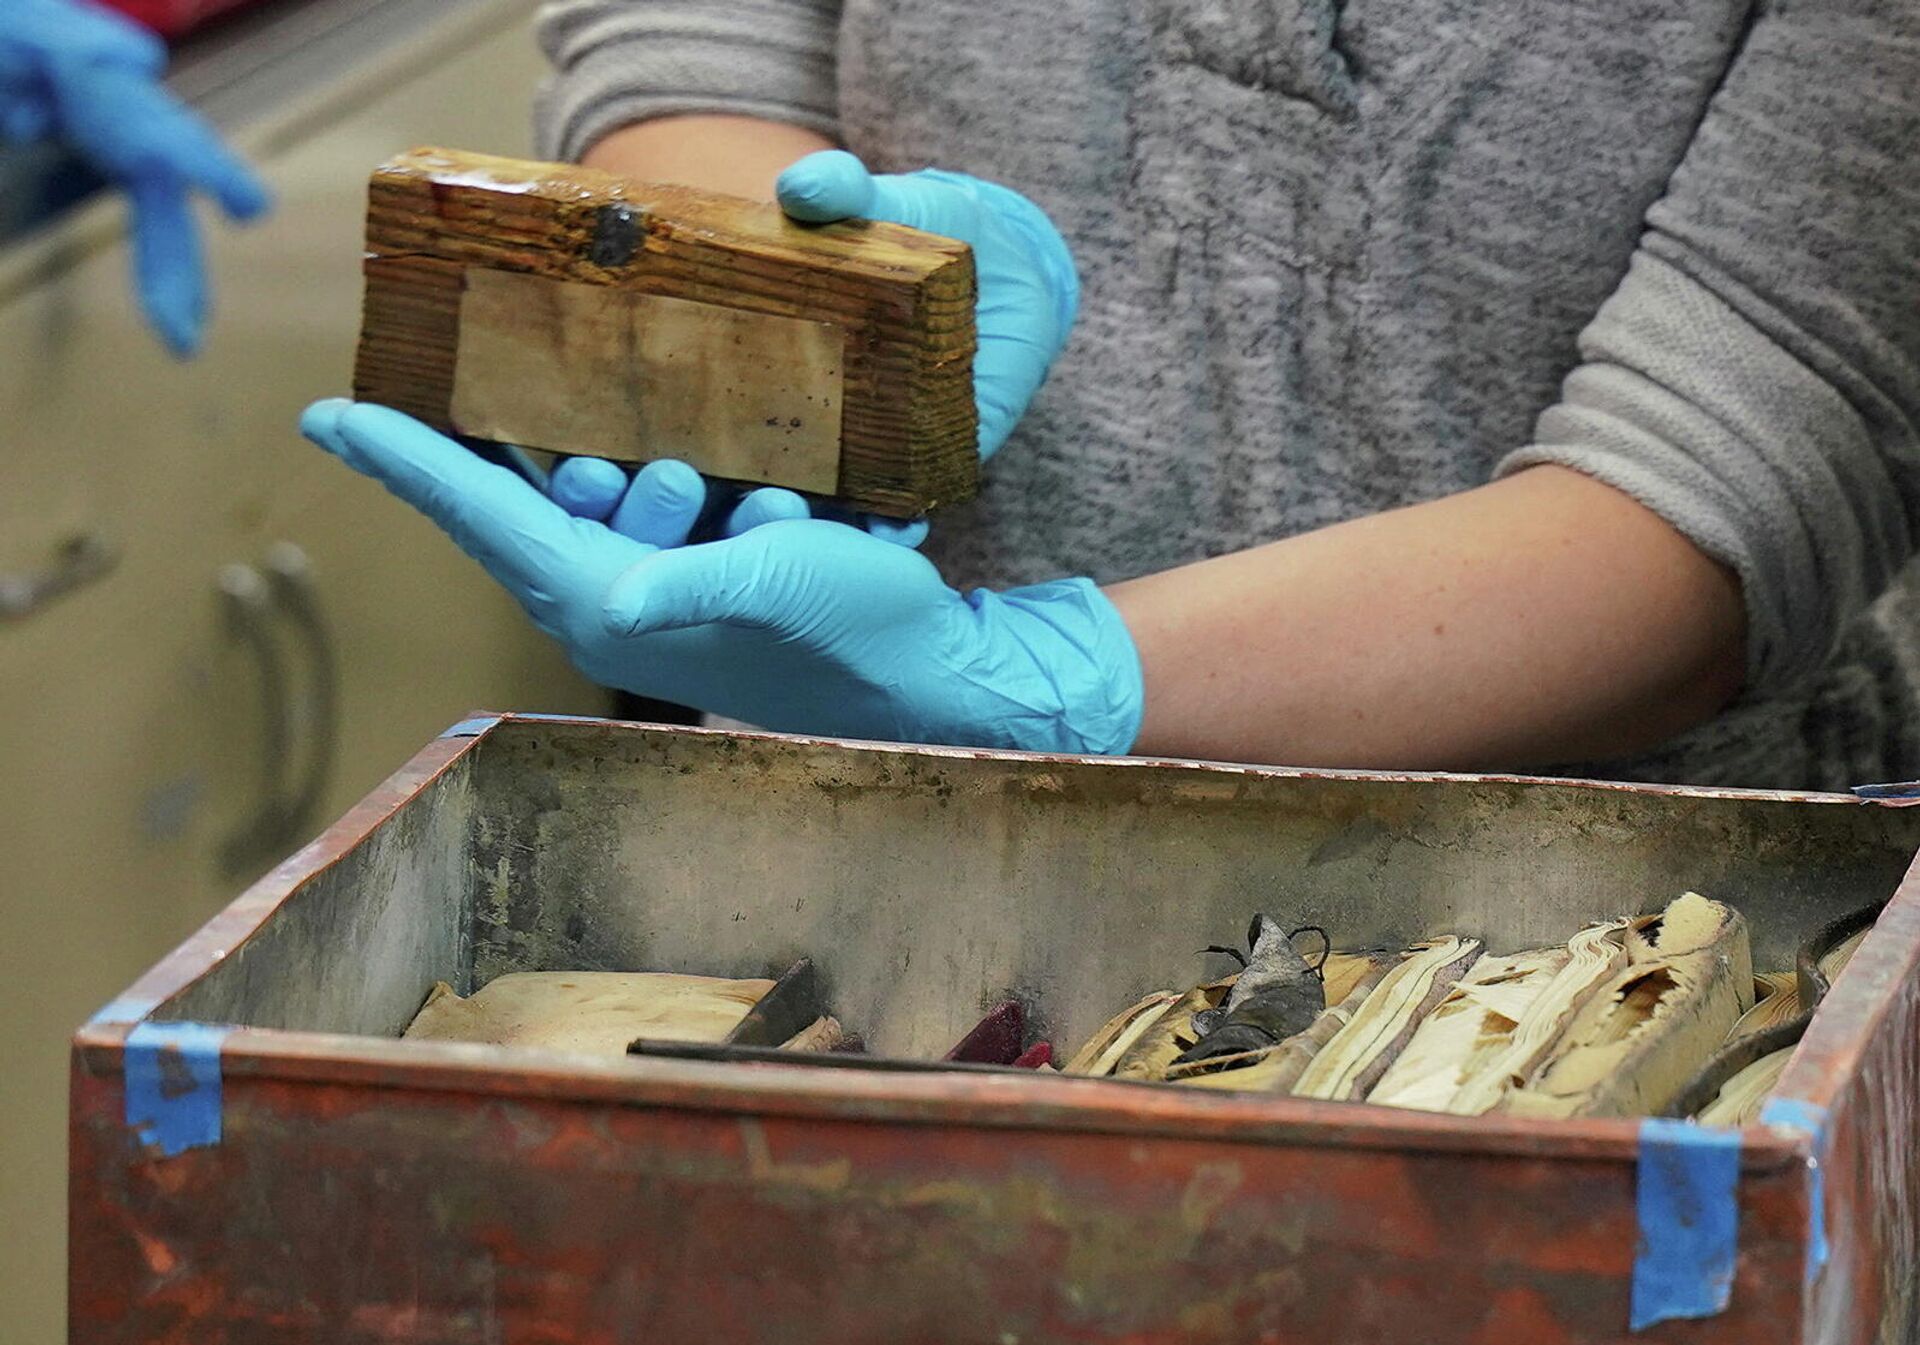 Sue Donovan, conservator for Special Collections of the University of Virginia Library, removes a piece of wood with a bullet found in a time capsule recovered from Confederate General Robert E. Lee's monument in Richmond, Virginia, U.S., December 28, 2021. - Sputnik International, 1920, 29.12.2021